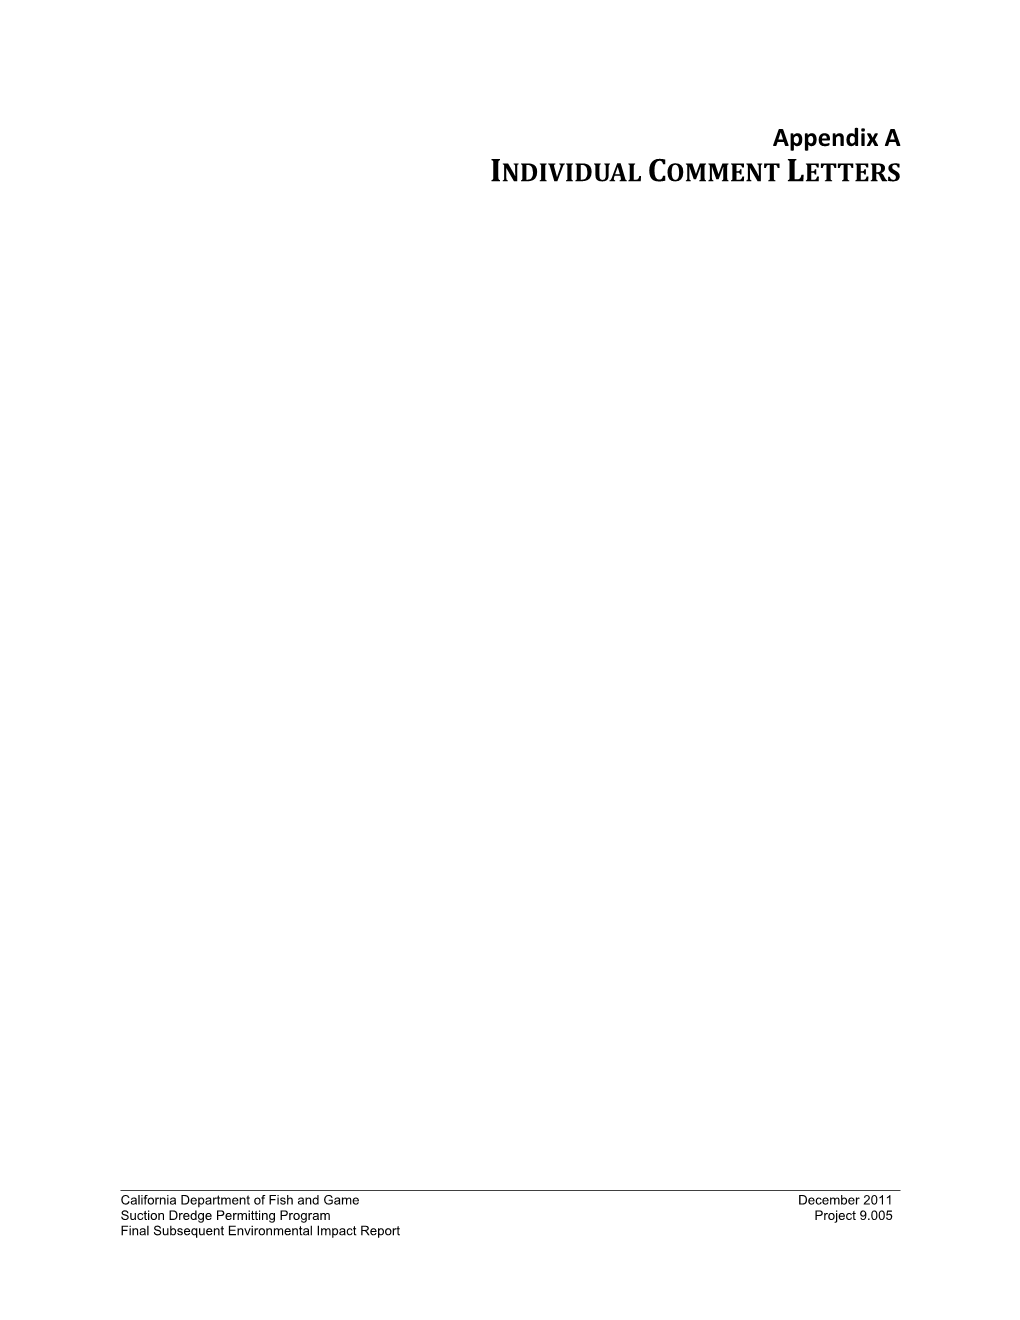 Individualcommentletters